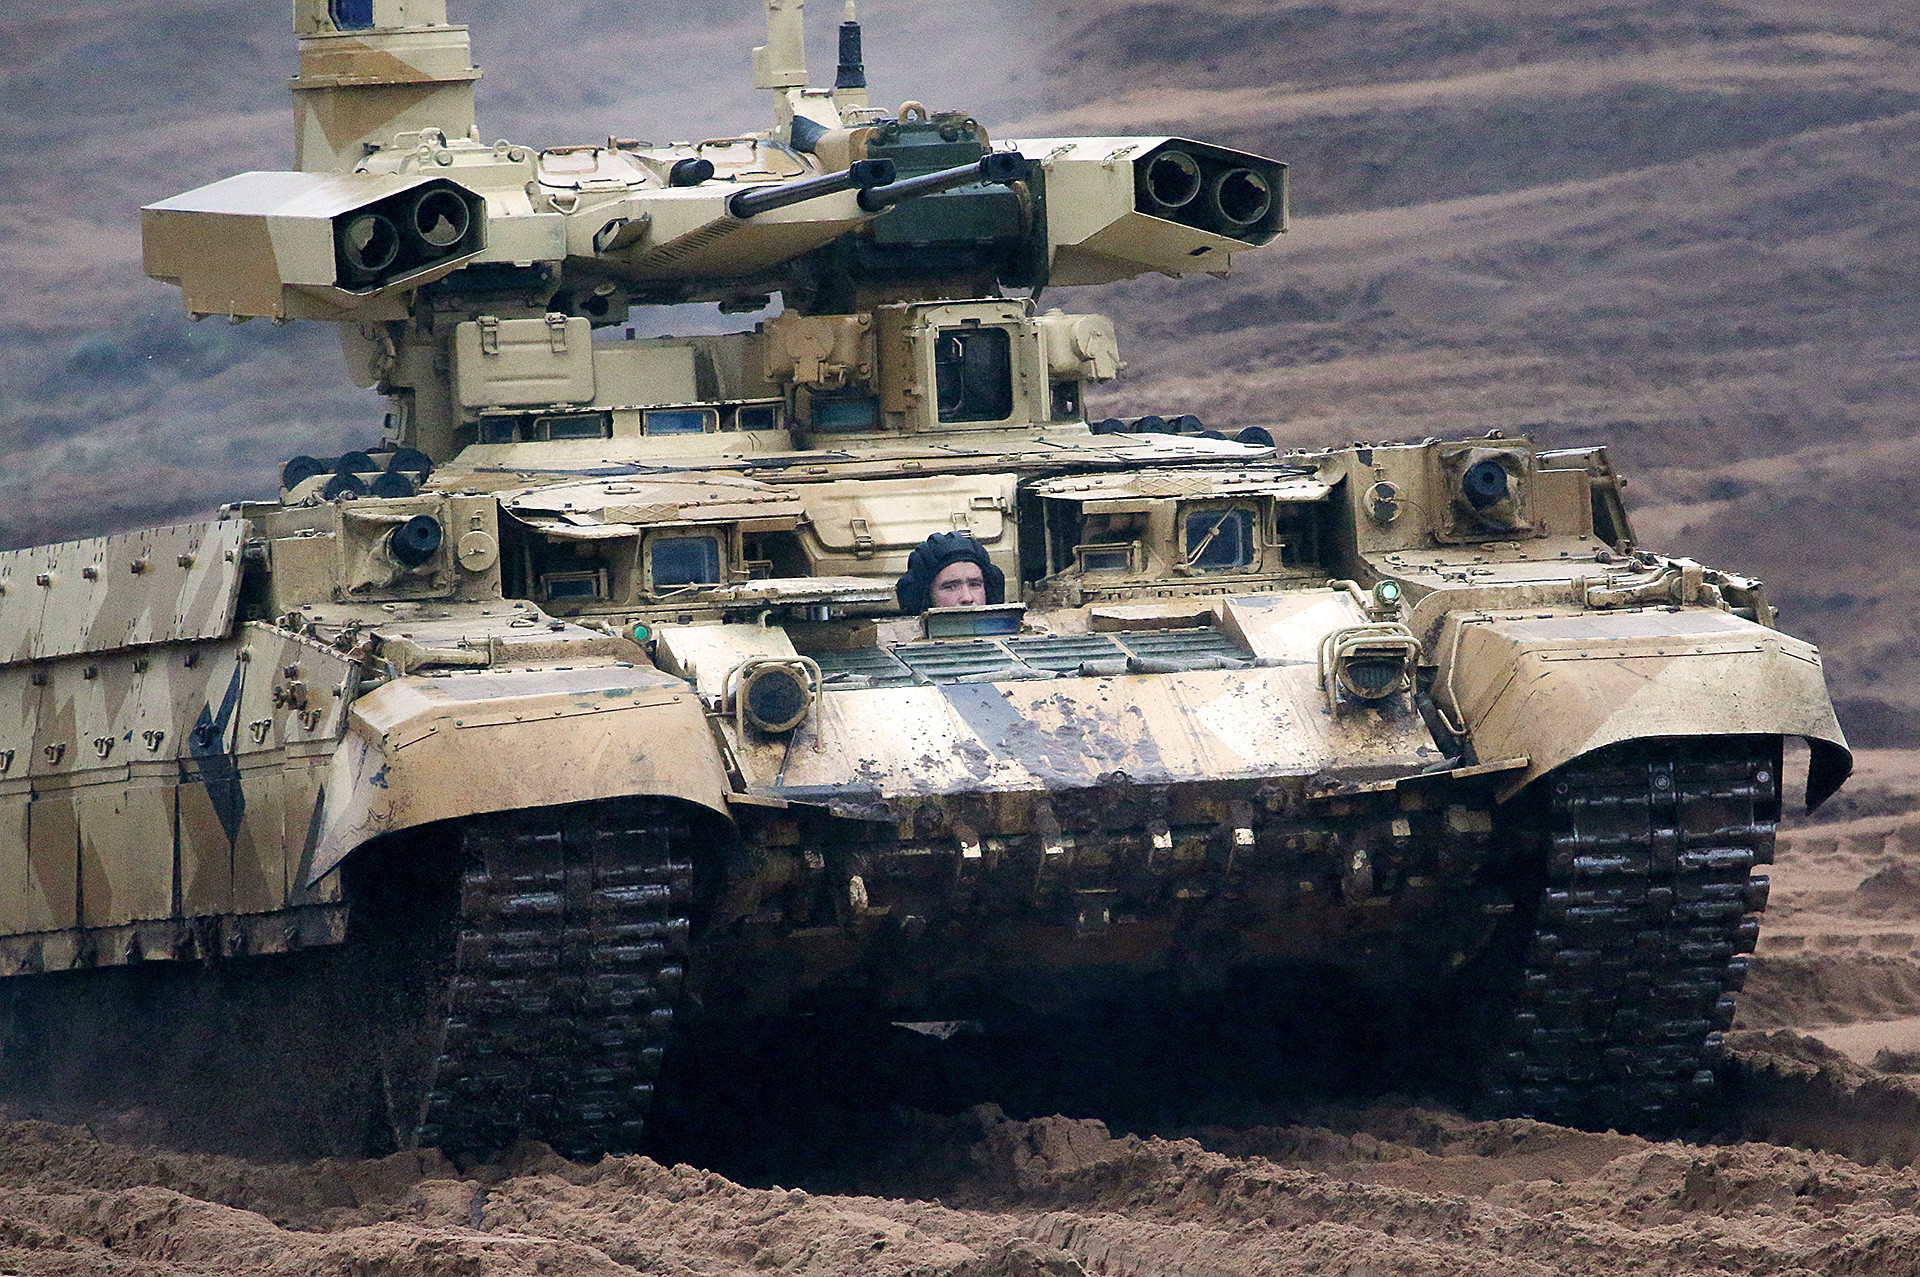 A BMPT-72 (Terminator 2) heavy infantry fighting vehicle in Zapad 2017, a joint military exercise by the armed forces of Russia and Belarus at Luzhsky.